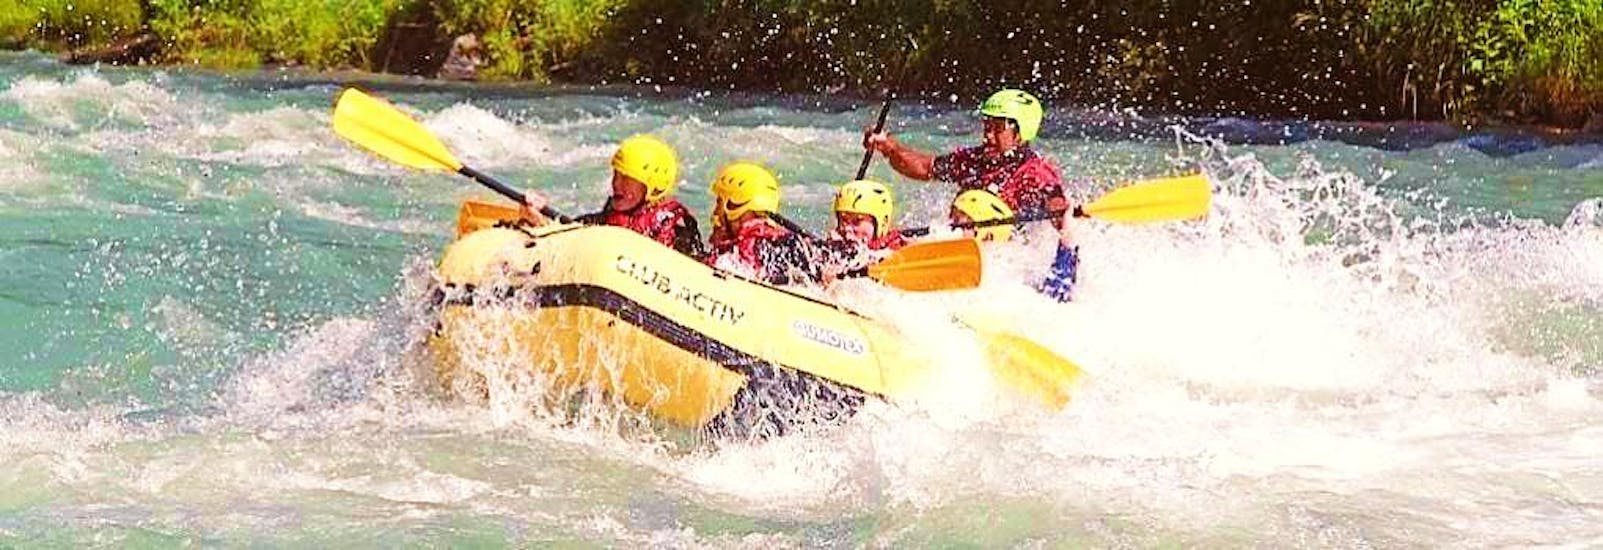 Rafting sul fiume Aurino a Campo Tures - Giro breve.